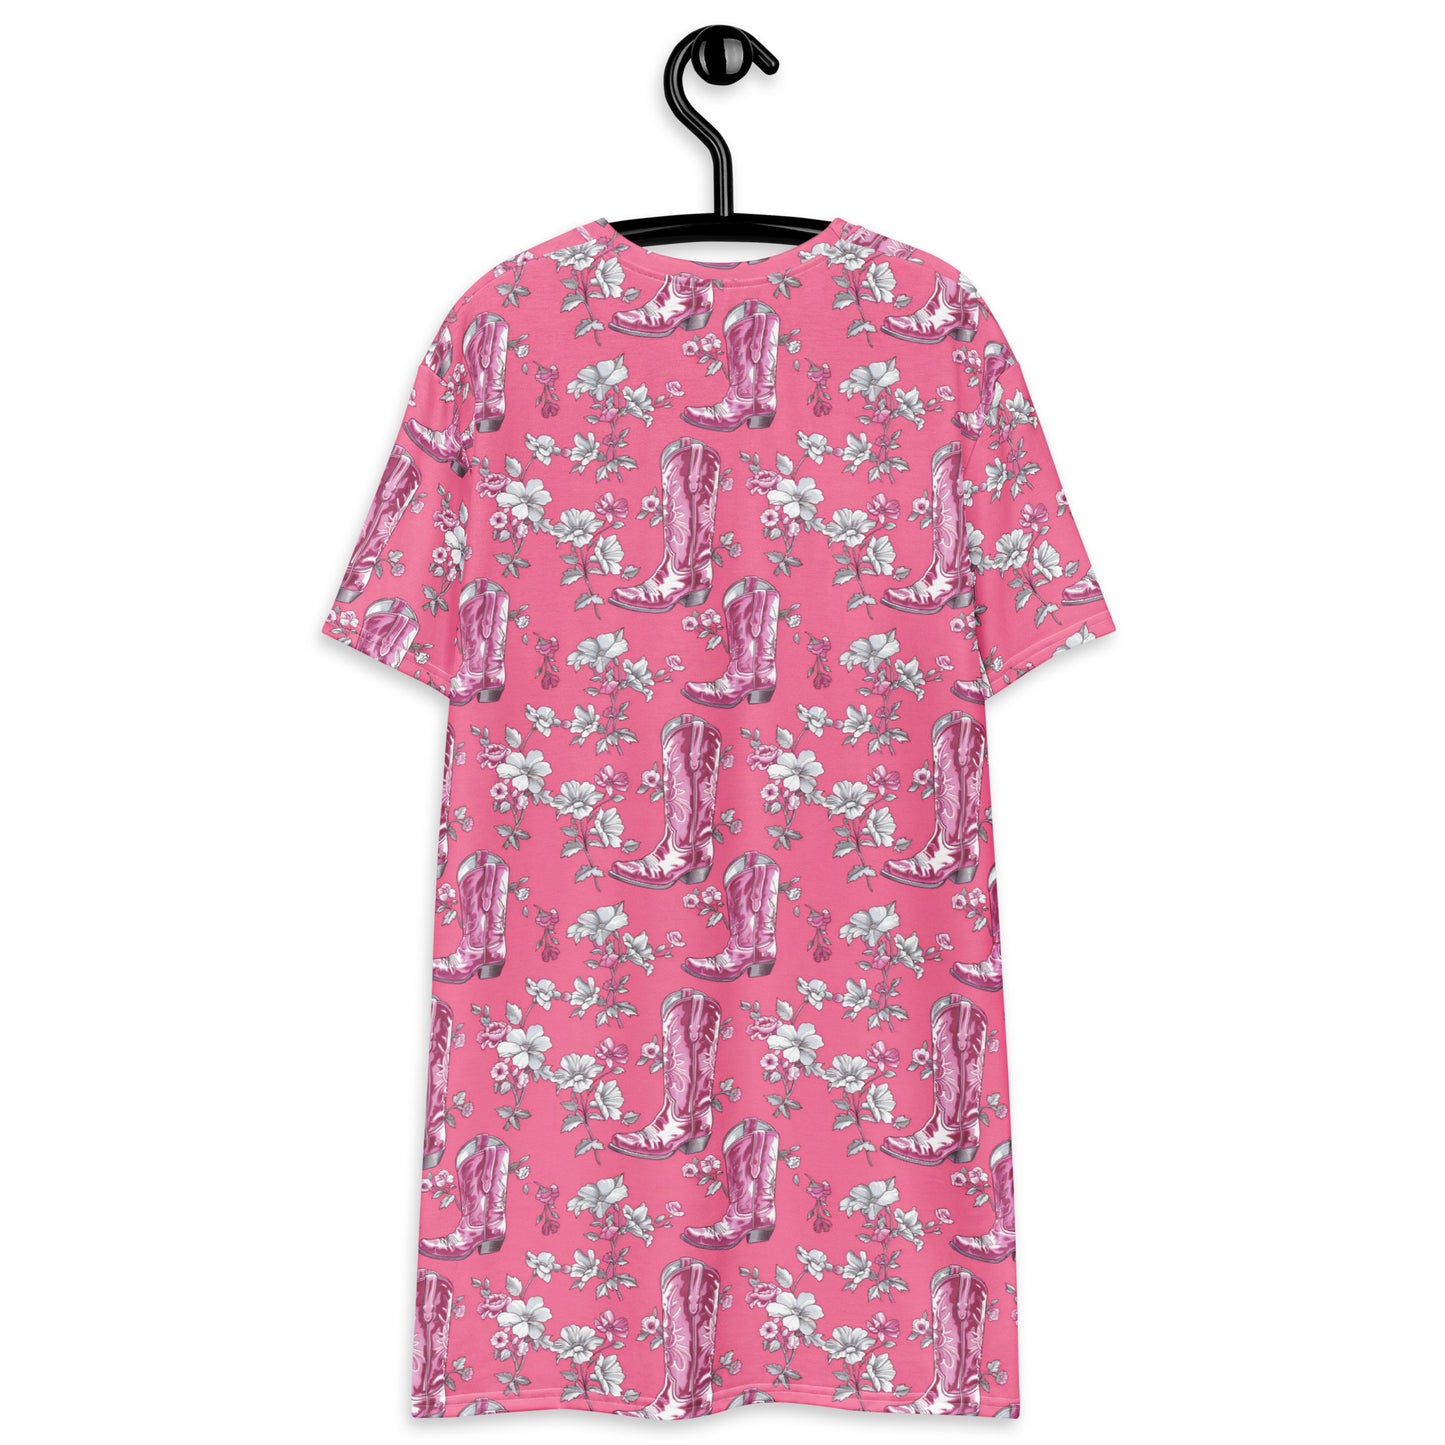 Pink Western Tshirt Dress, Cowbow Boots Floral Women Ladies Mini Summer Shirt Festival Concert Party Casual Short Sleeve Plus Size Tee